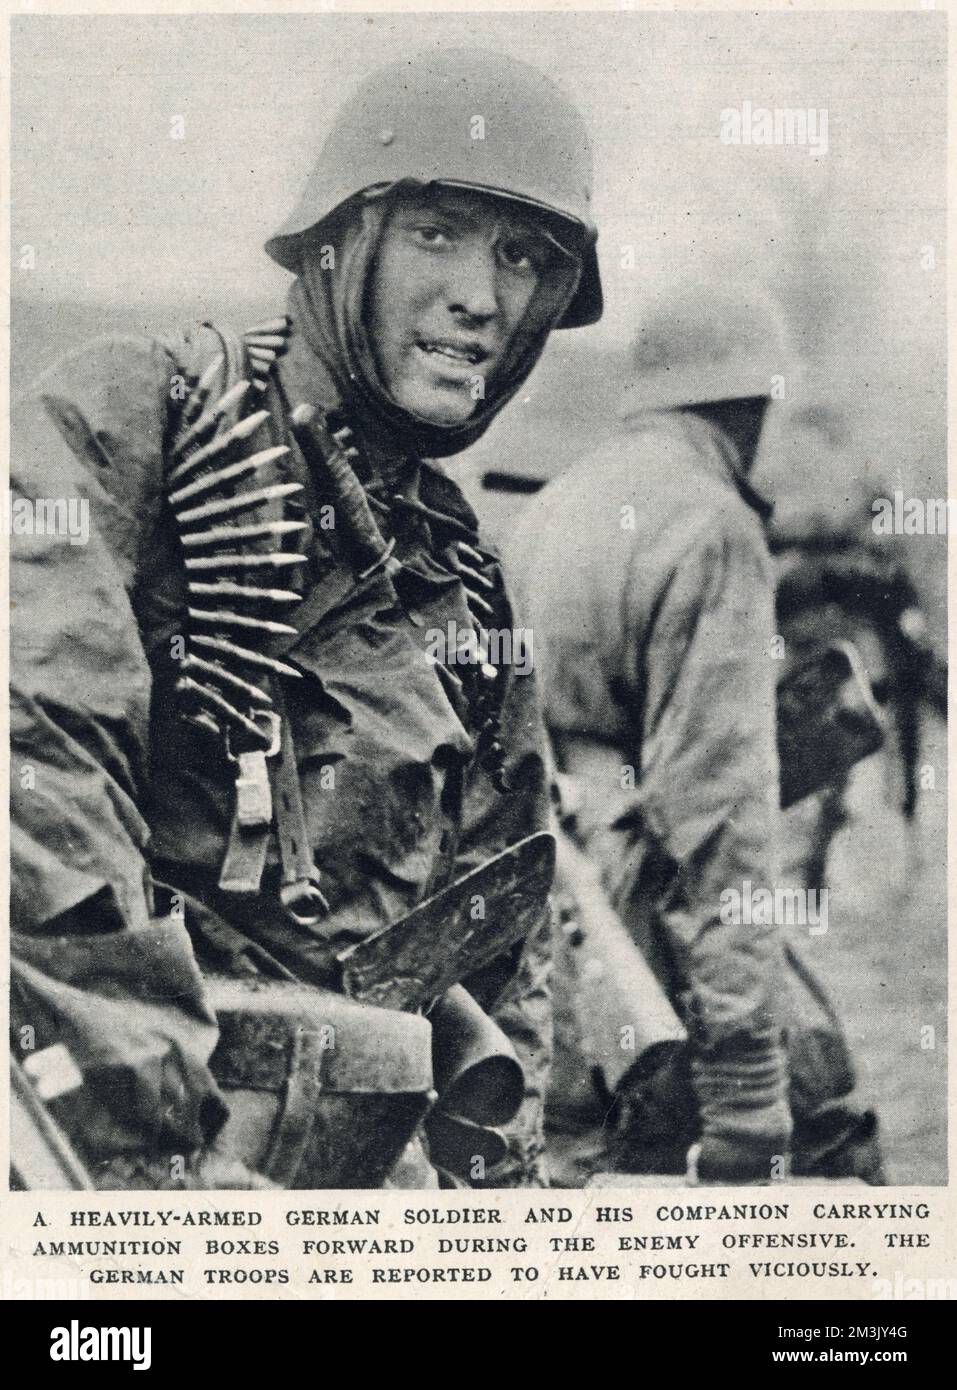 Photograph showing a German SS infantryman and his companion carrying ammunition boxes forward, during the early stages of the 'Battle of the Bulge', December 1944.  The 'Battle of the Bulge' was the last major Nazi offensive on the Western front during the Second World War and, though initially successful, resulted in major German losses.  This photograph was taken by a German film unit during the German offensive. The film was then captured during the Allied counter-offensive. Stock Photo